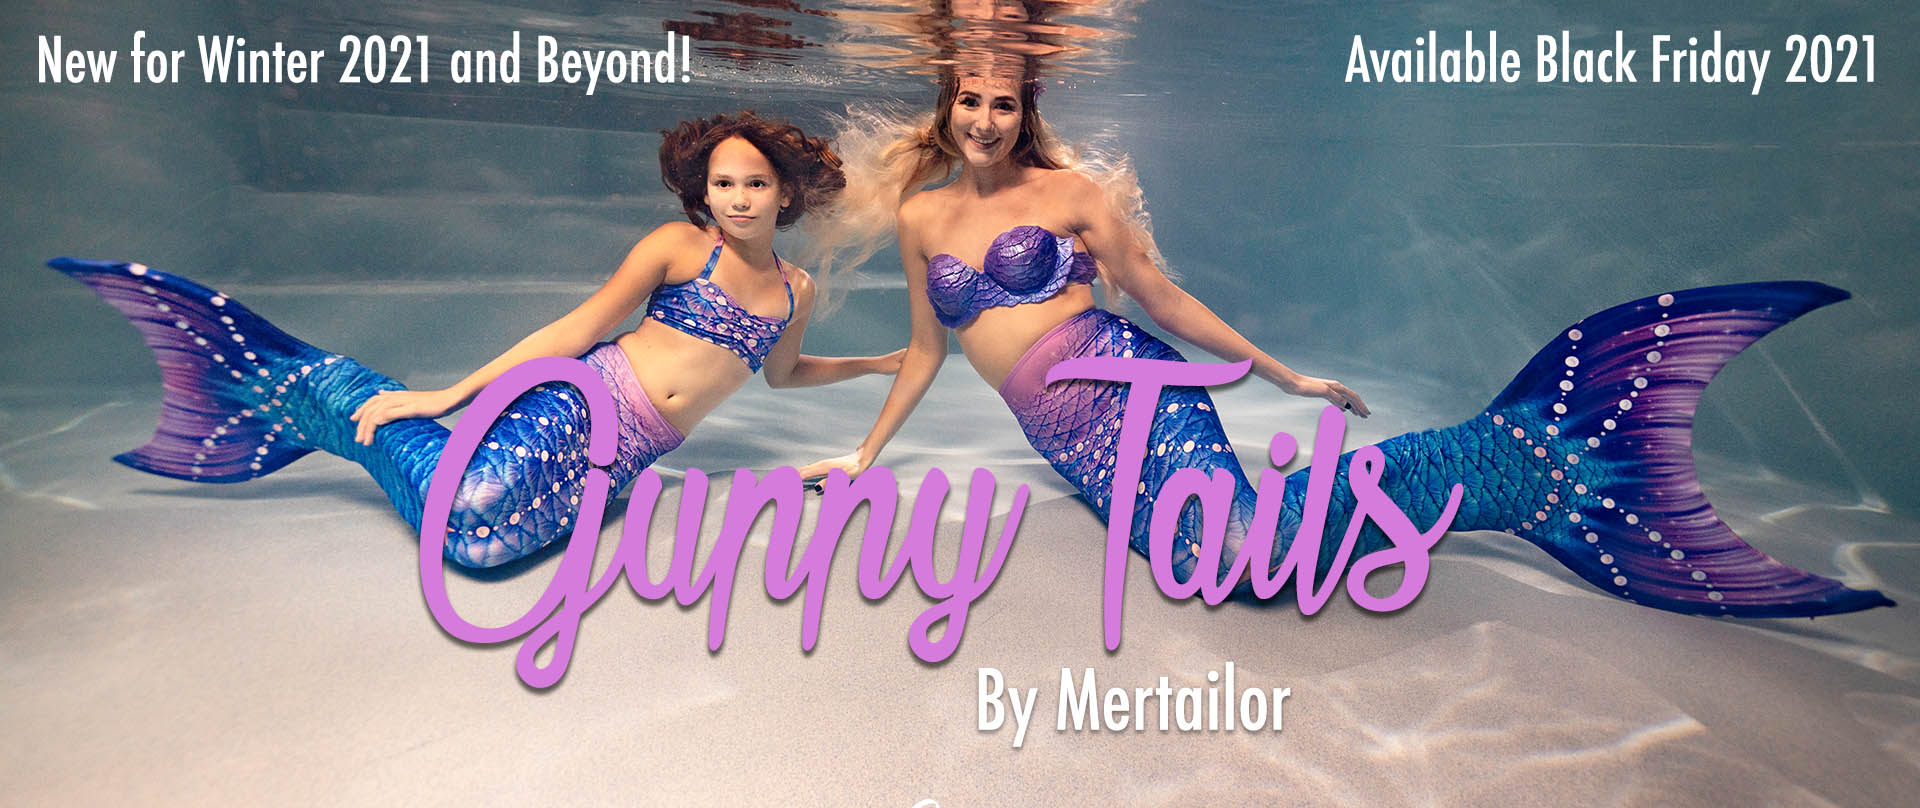 Guppy Mermaid Tail by Mertailor Banner